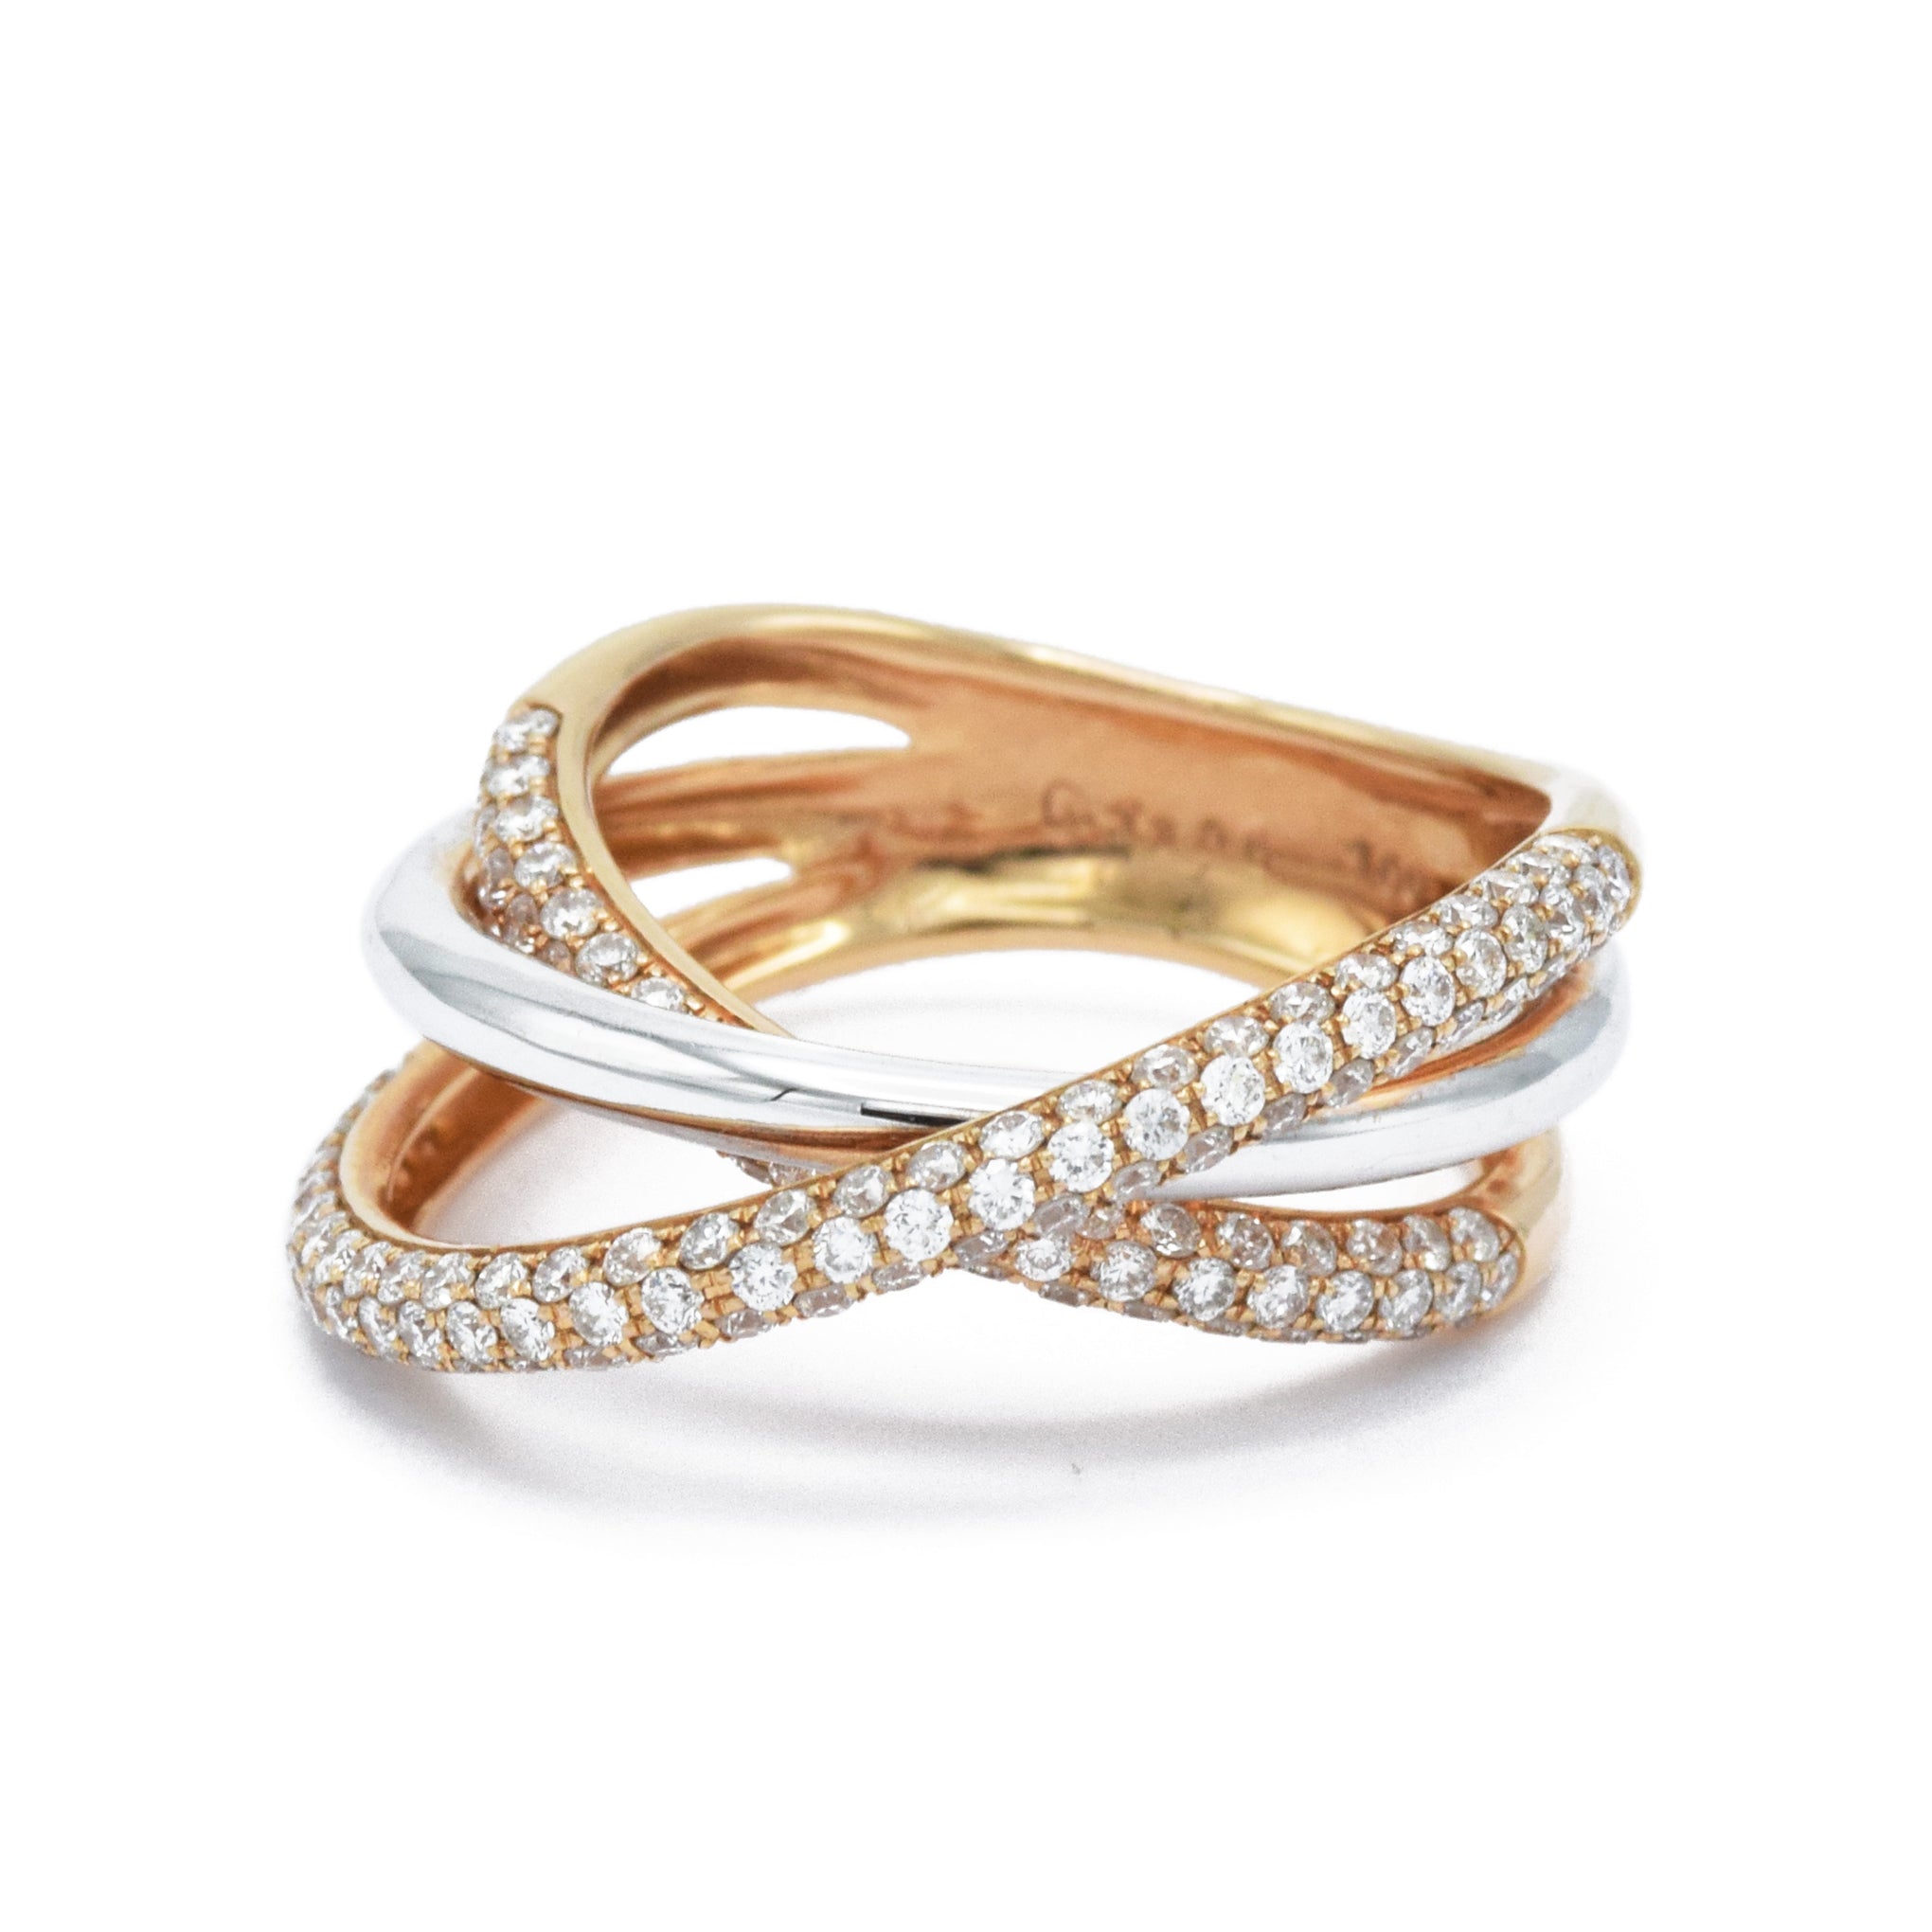 18KT Tricolor Gold And Diamond Twist Ring